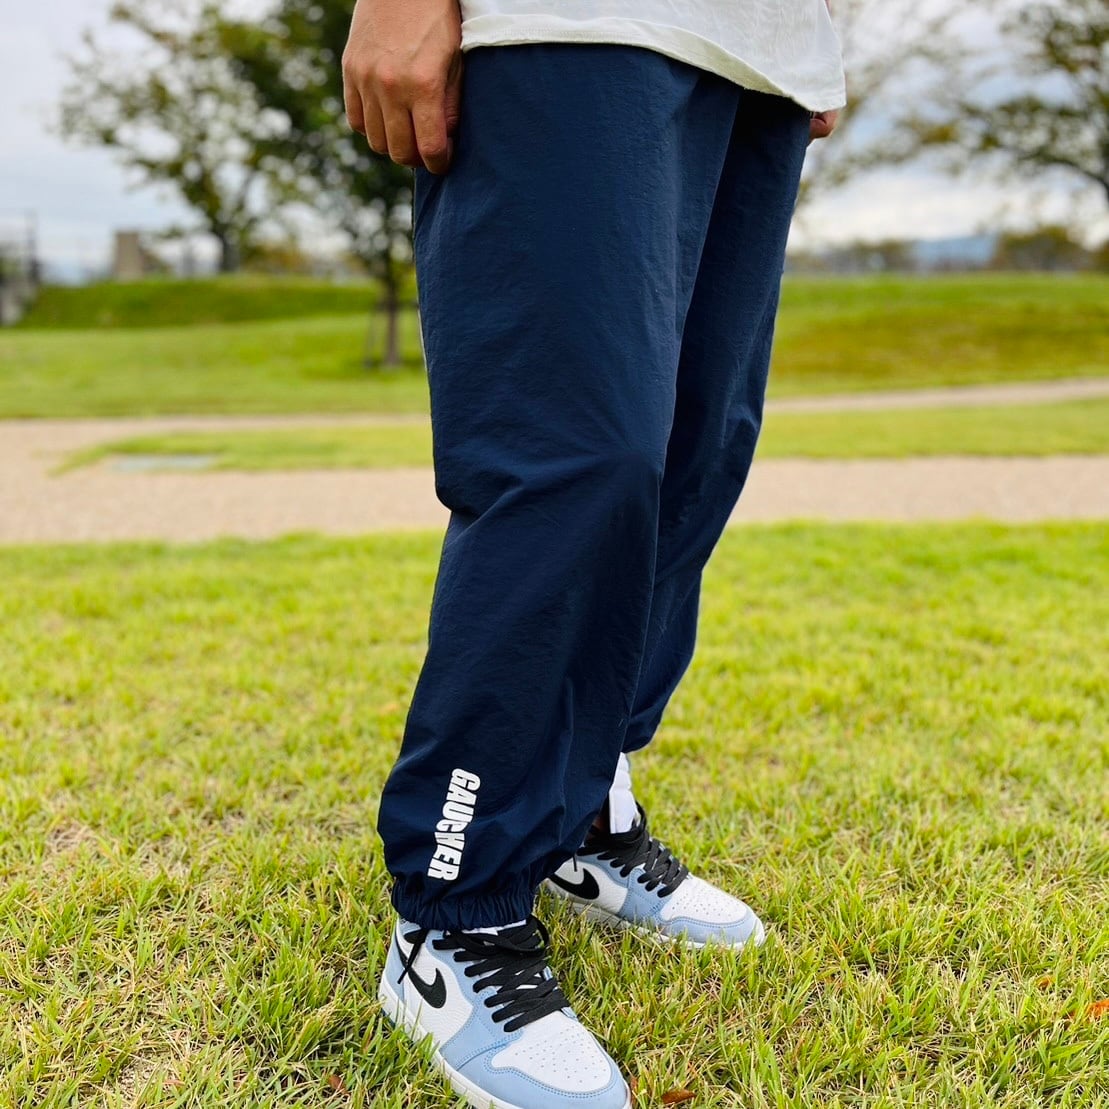 AW Nylon Track Pants | gaucher powered by BASE